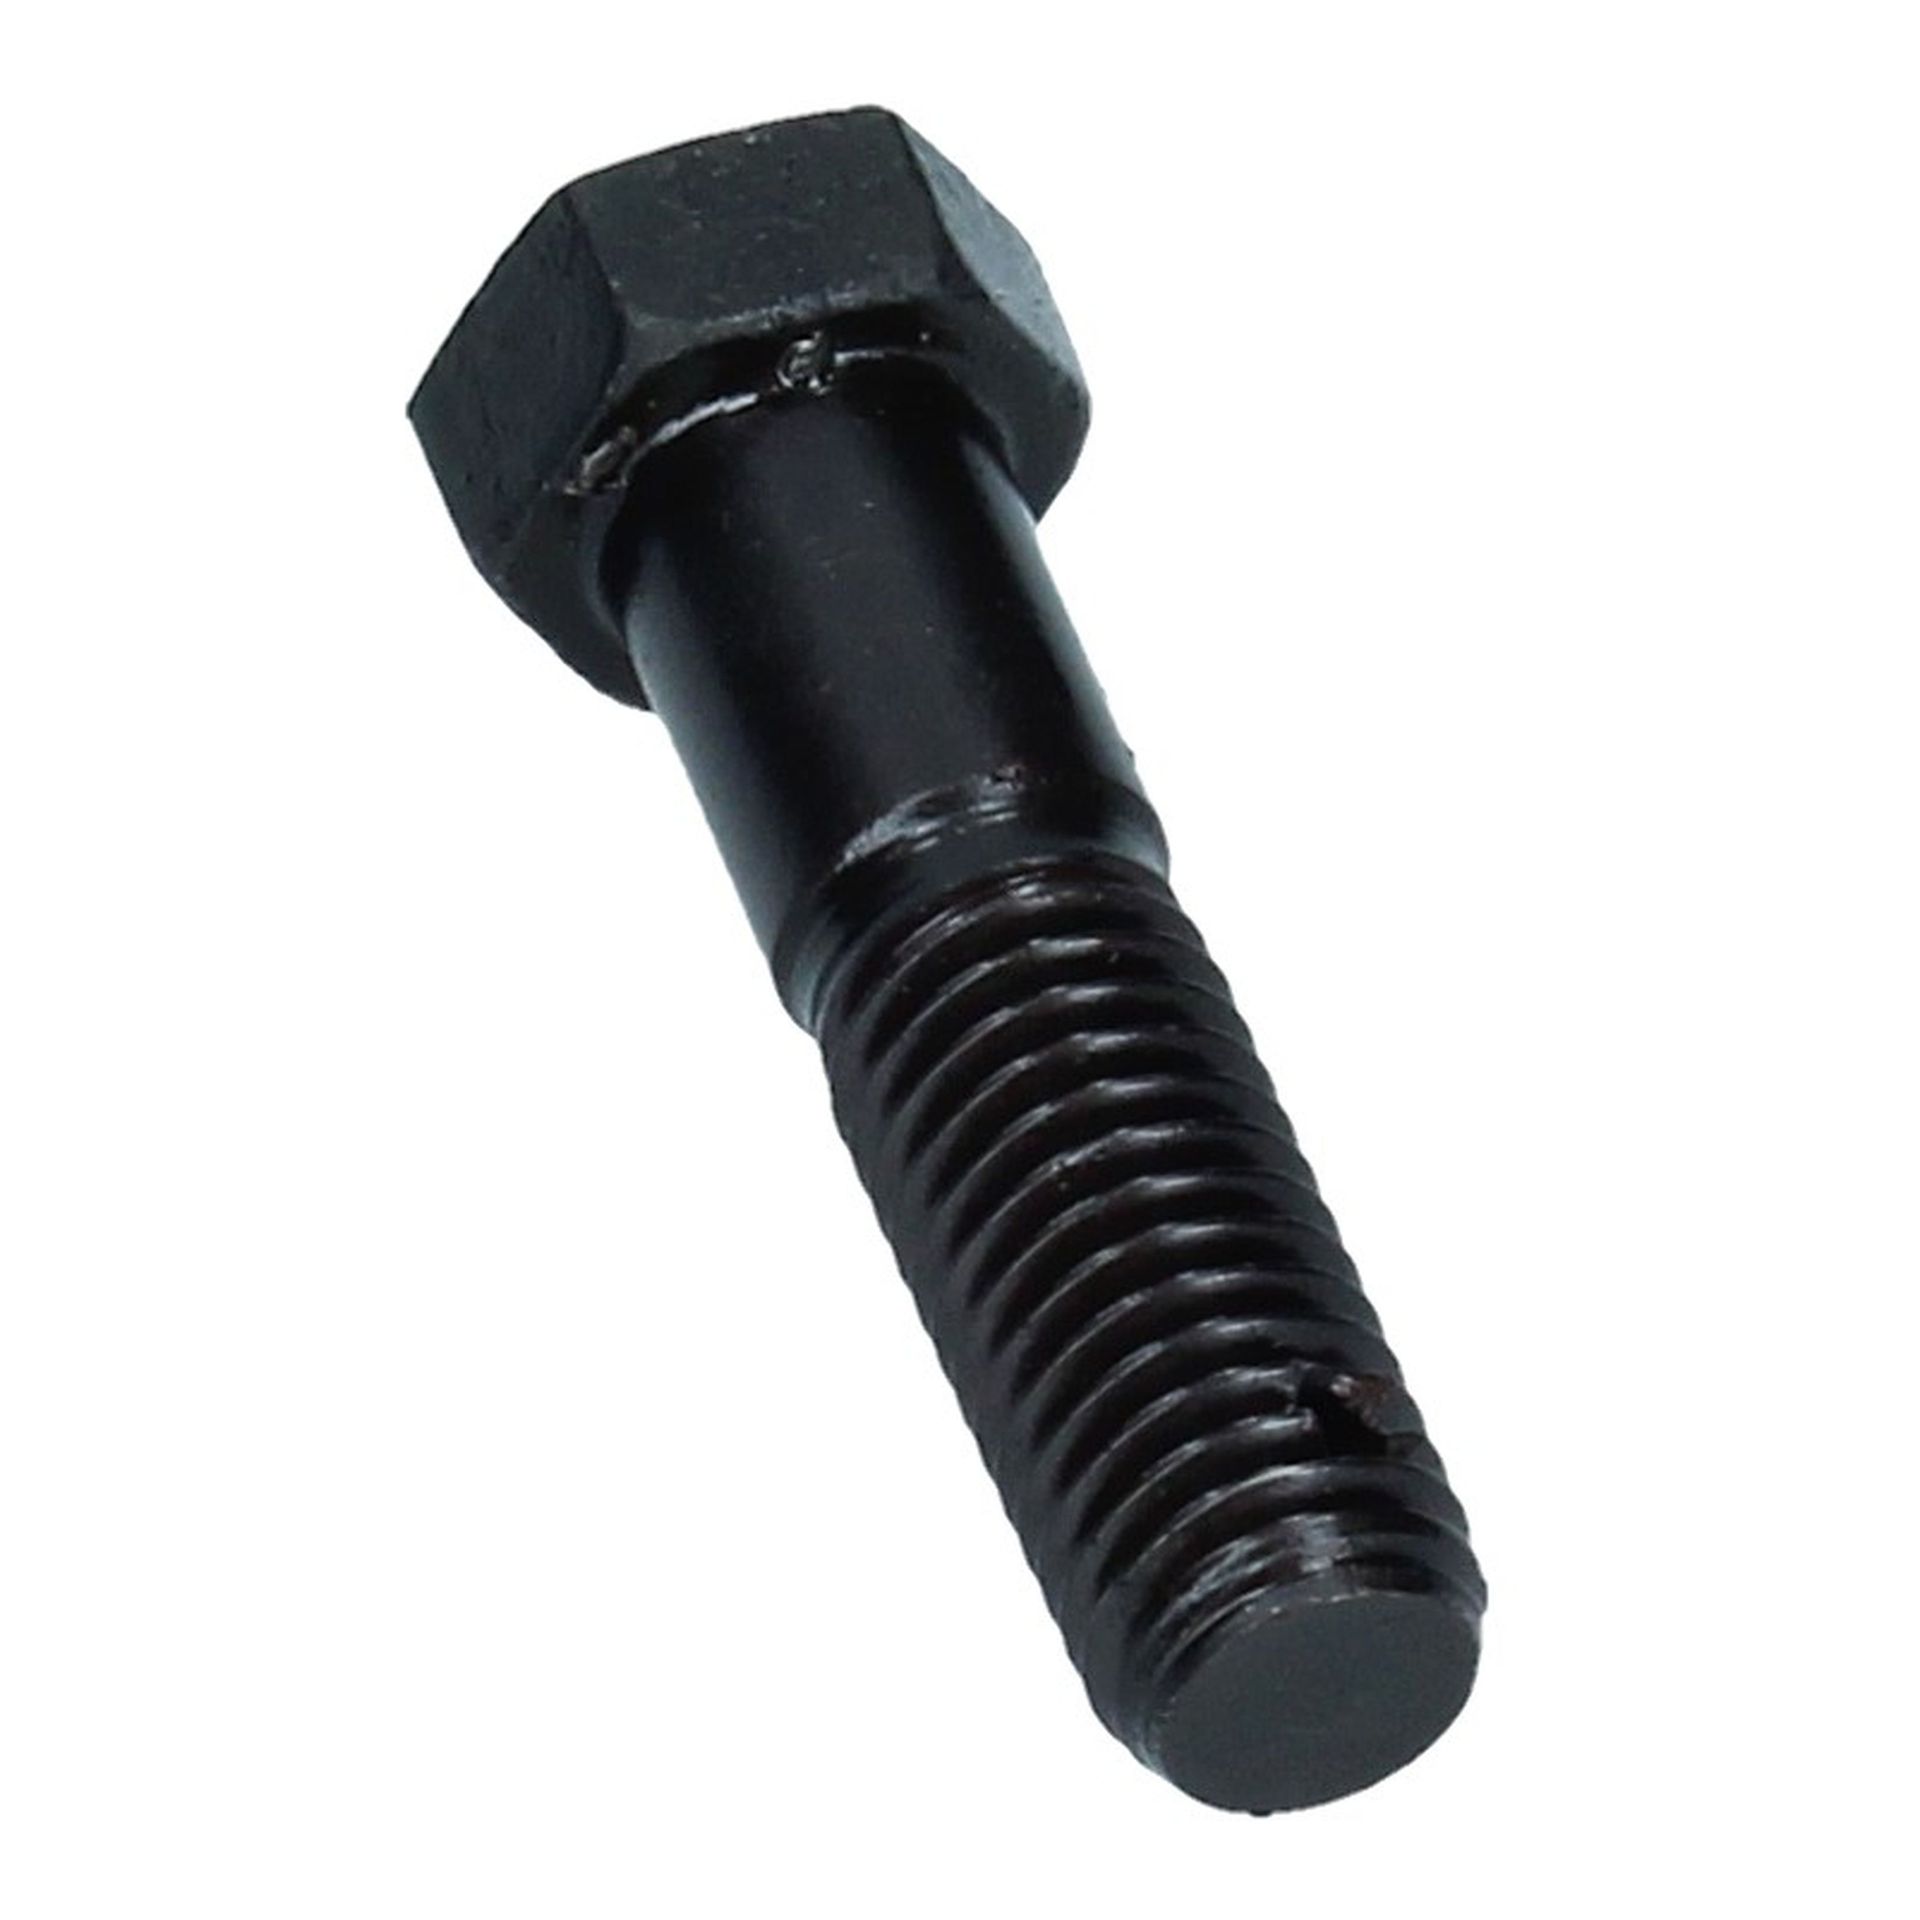 Steering Box Knuckle Pinch Bolt